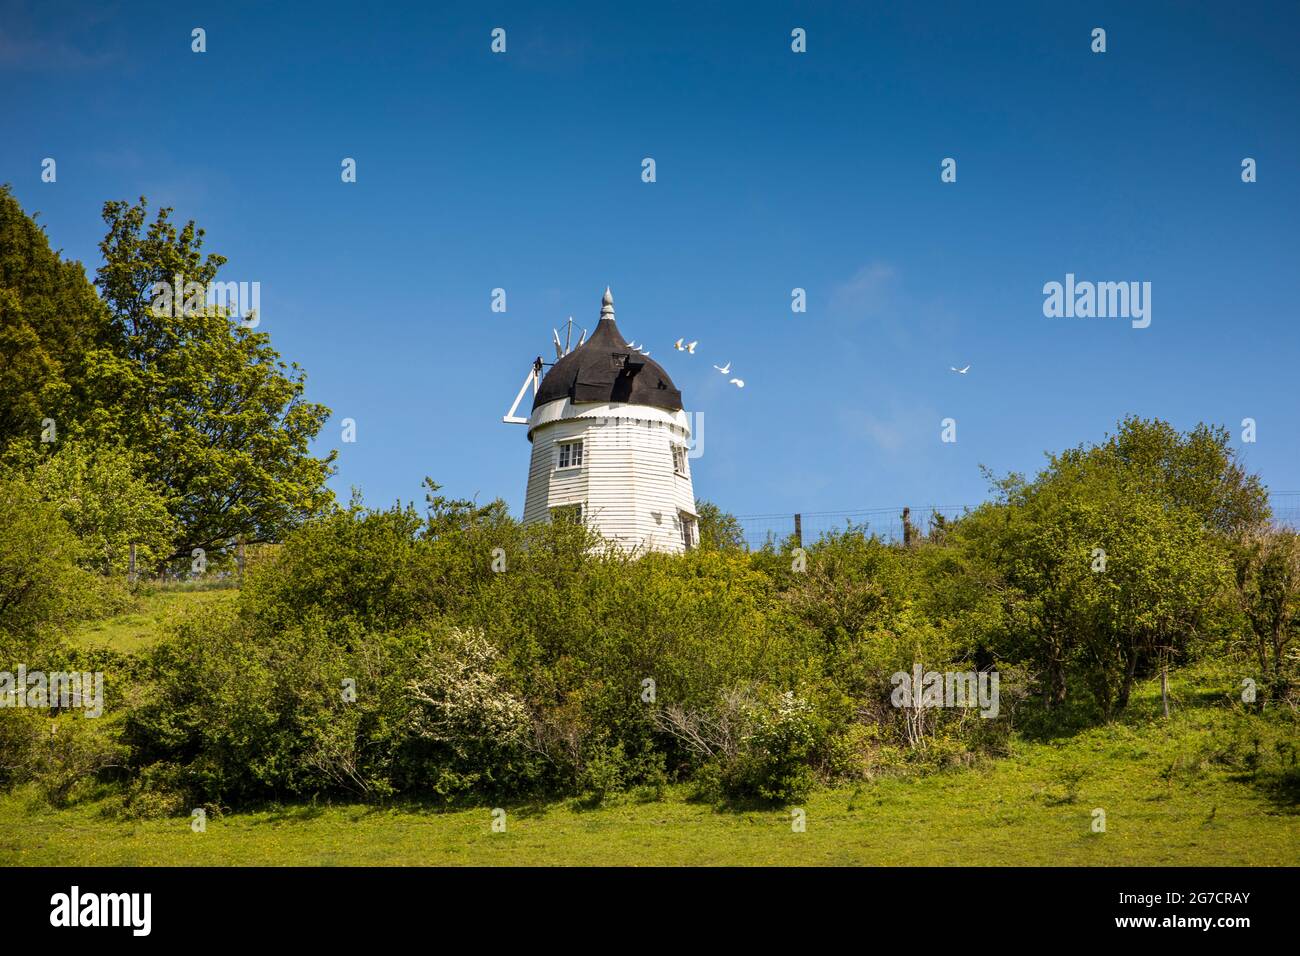 UK, England, Buckinghamshire, Hambleden Valley, Turville, Turville Hill, pigeons alighting on Cobstone Windmill, Chitty Chitty Bang Bang location Stock Photo